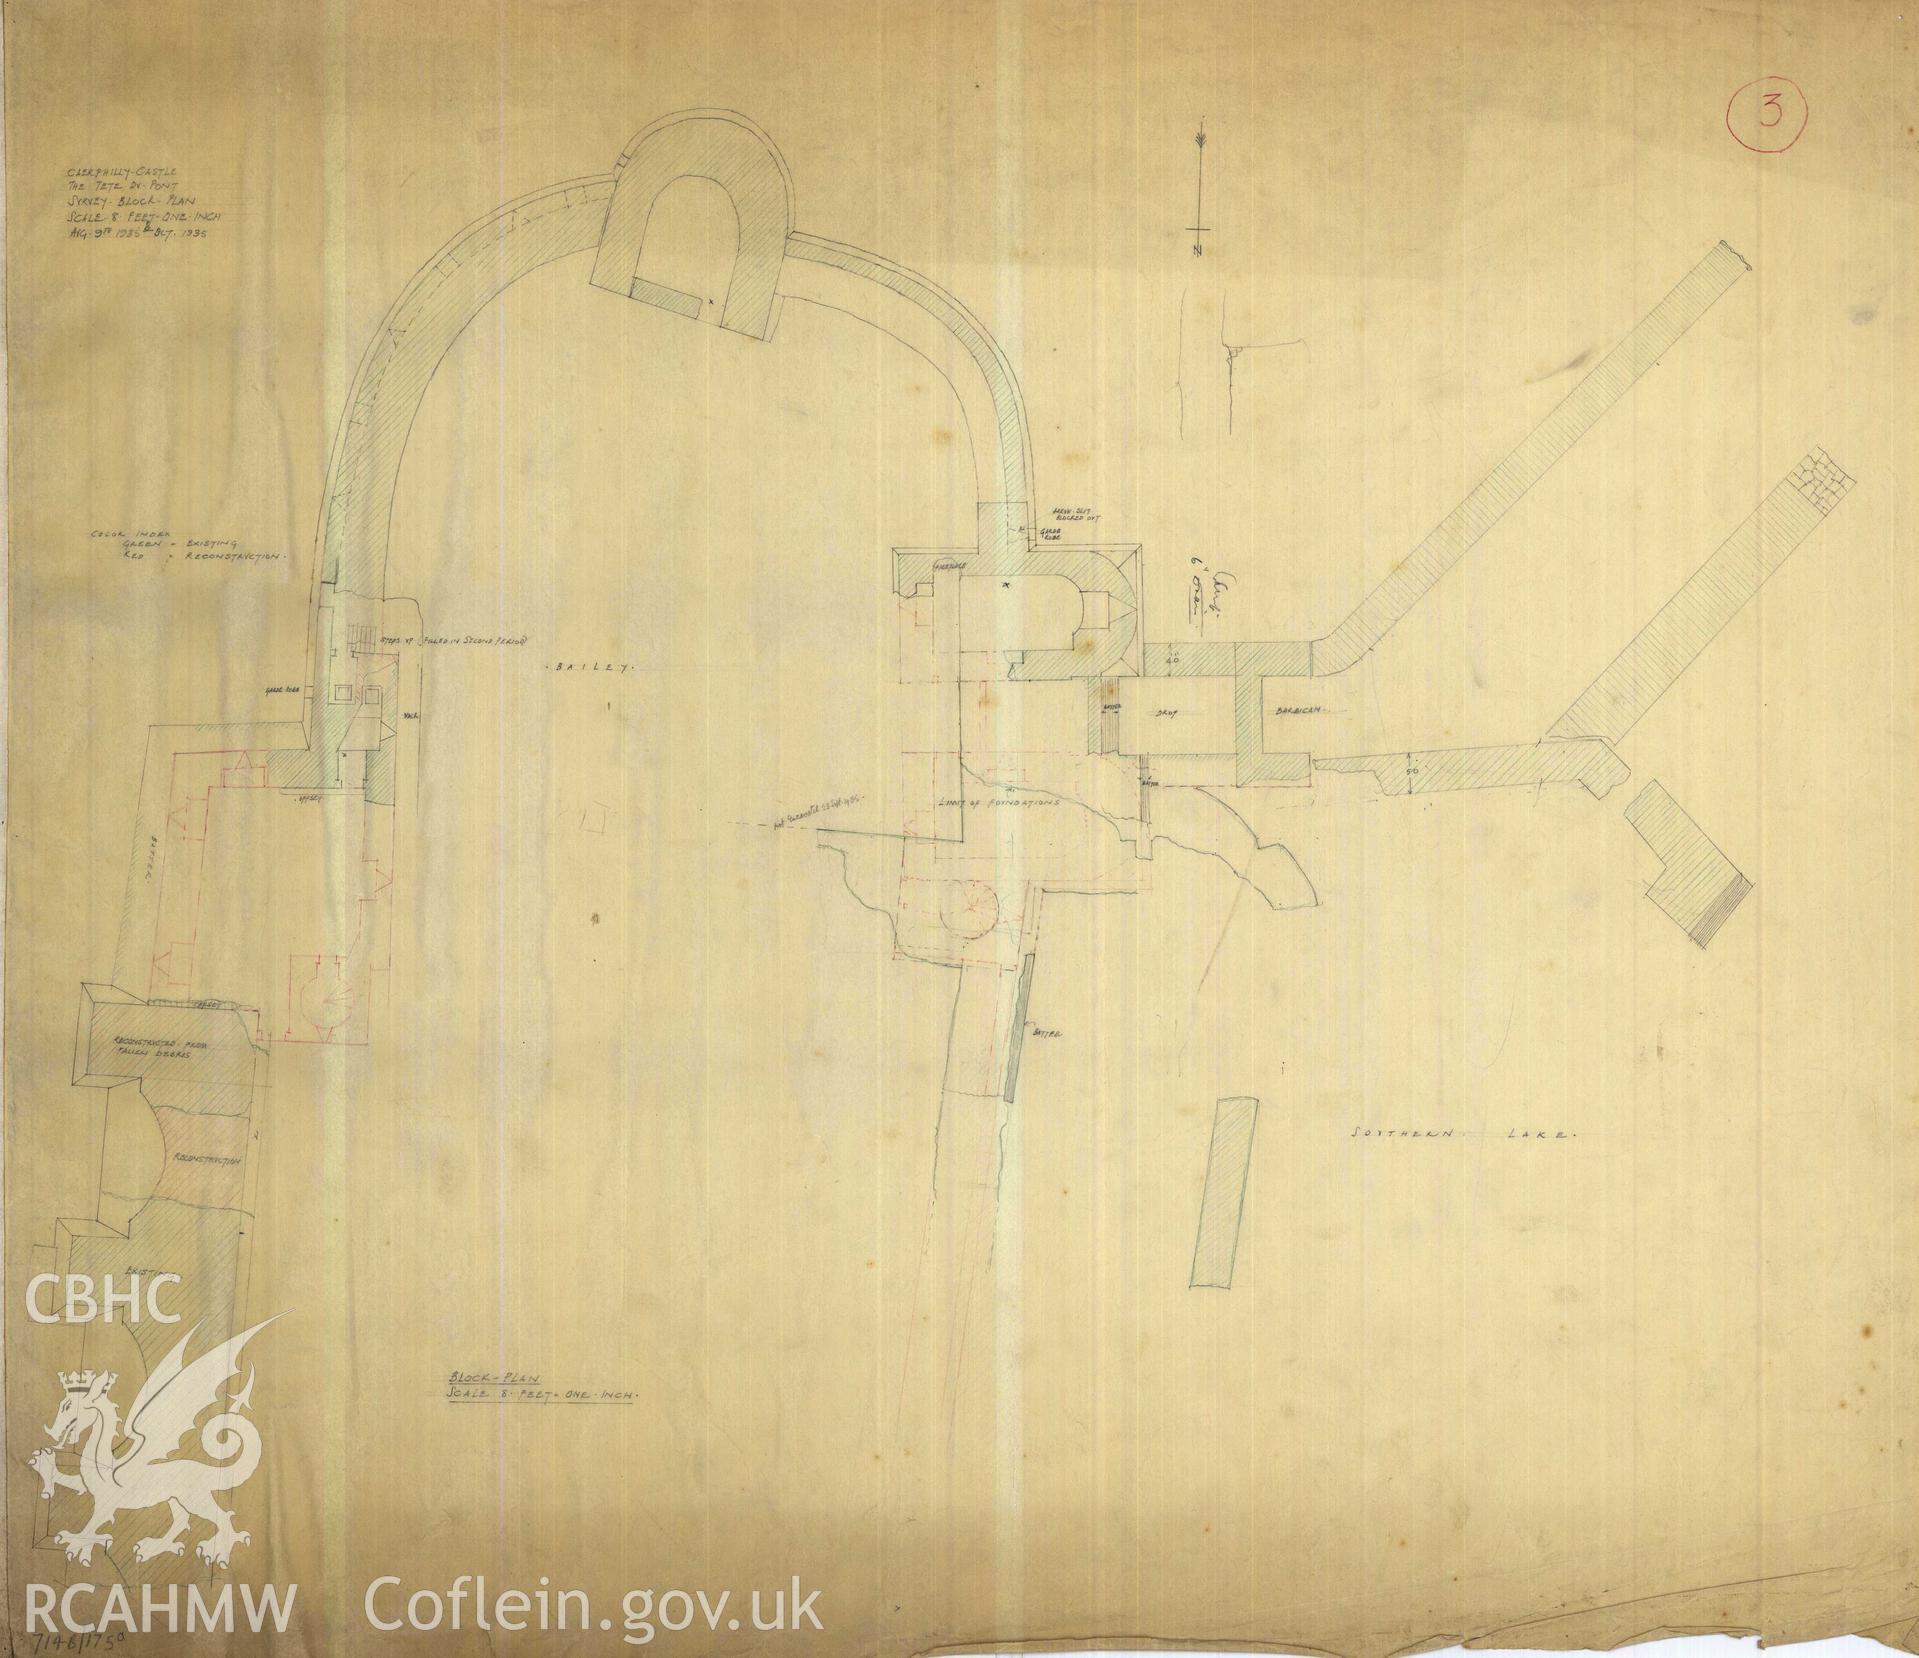 Cadw guardianship monument drawing of Caerphilly Castle. Dam, S part, general plan (ii). Cadw Ref. No:714B/175a. Scale 1:96.